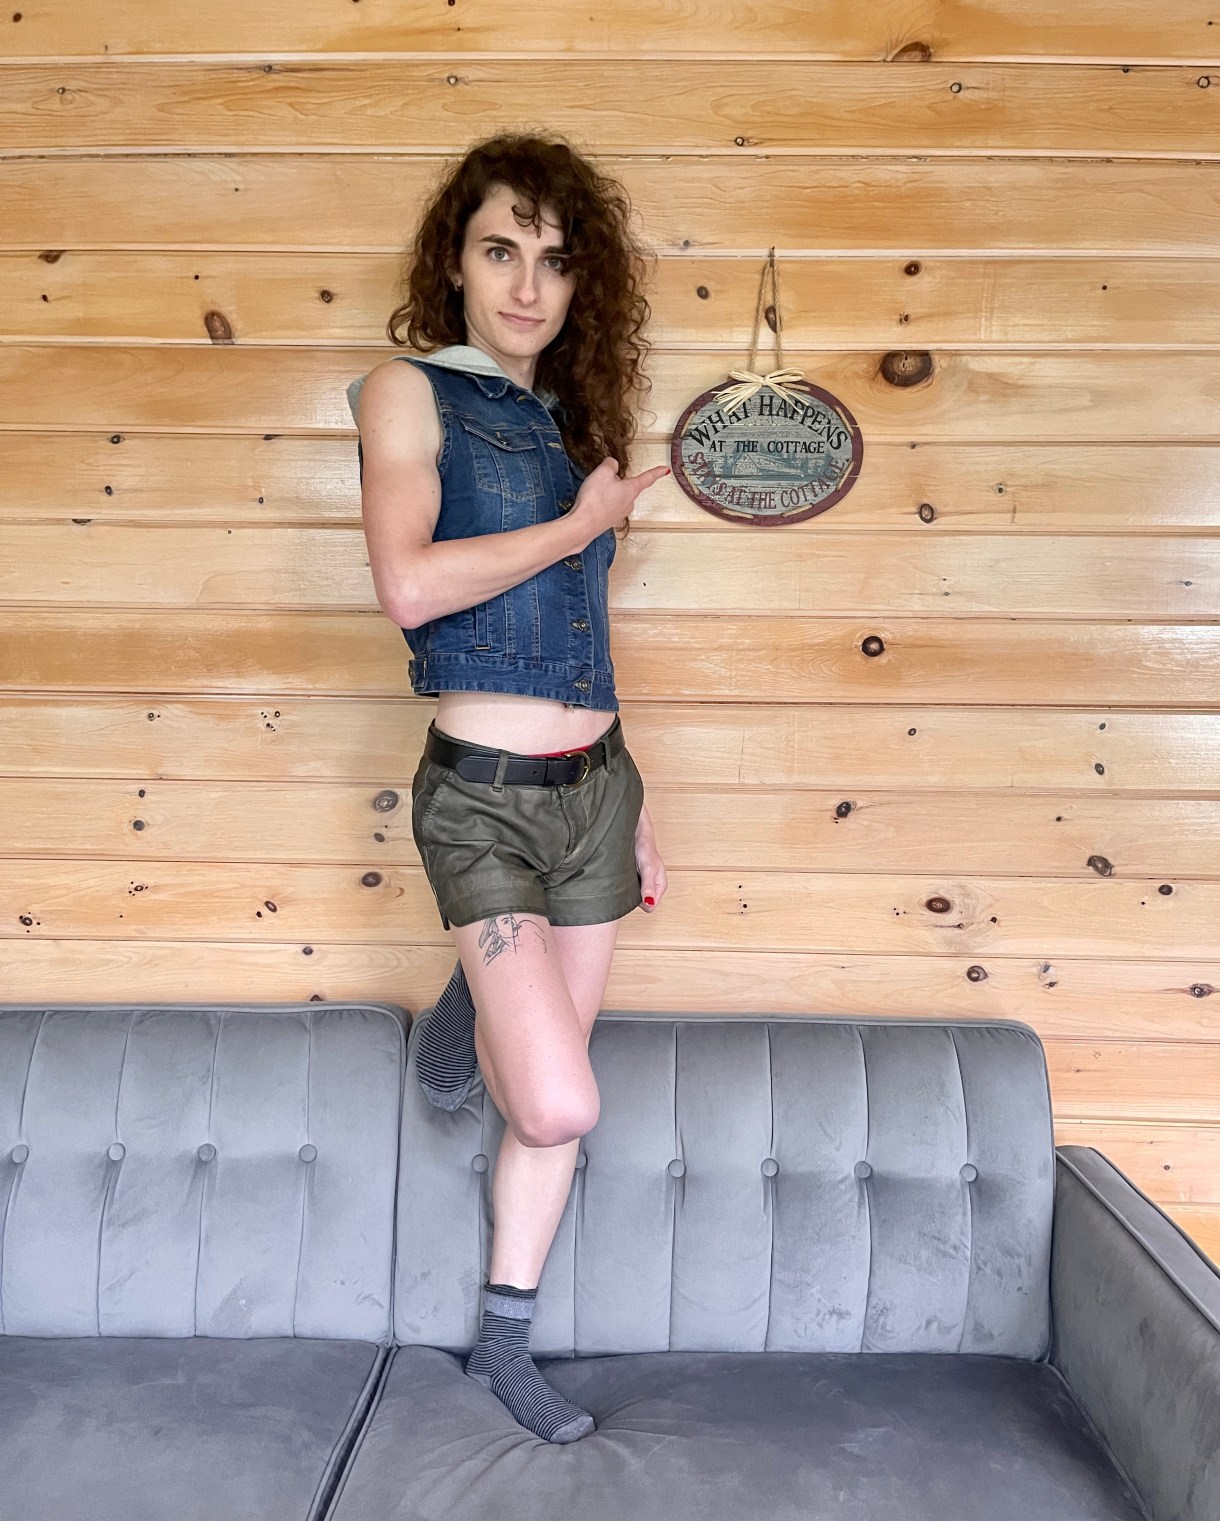 Drew is standing on one foot on a couch in what is presumably a cabin, pointing to a sign that reads 'whatever happens in this cabin, stays in this cabin.; Drew is a white woman with curly, long brown hair wearing short olive shorts and a denim vest.